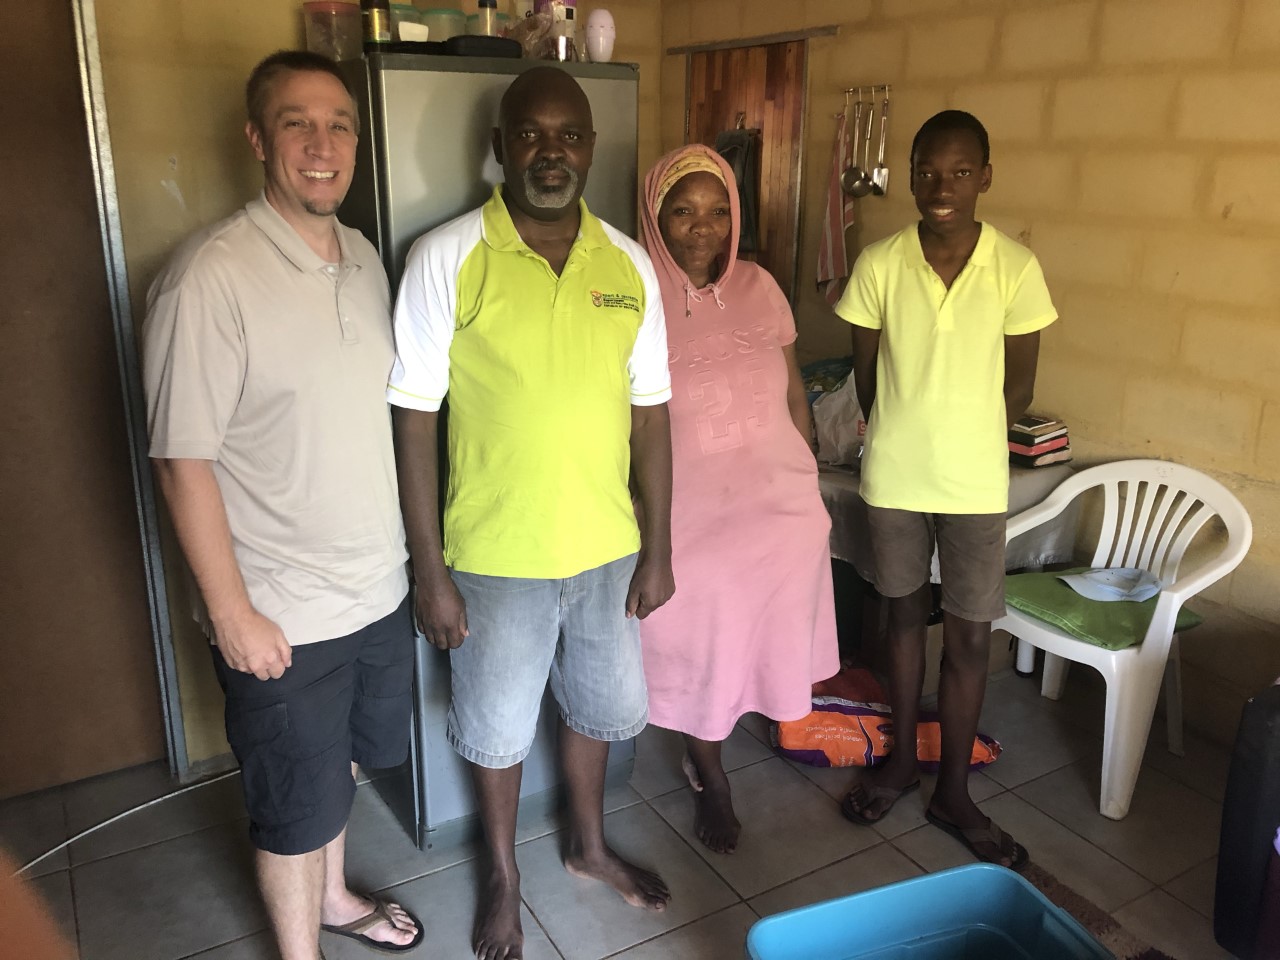 Darin Ishler making a food delivery to a South African family.